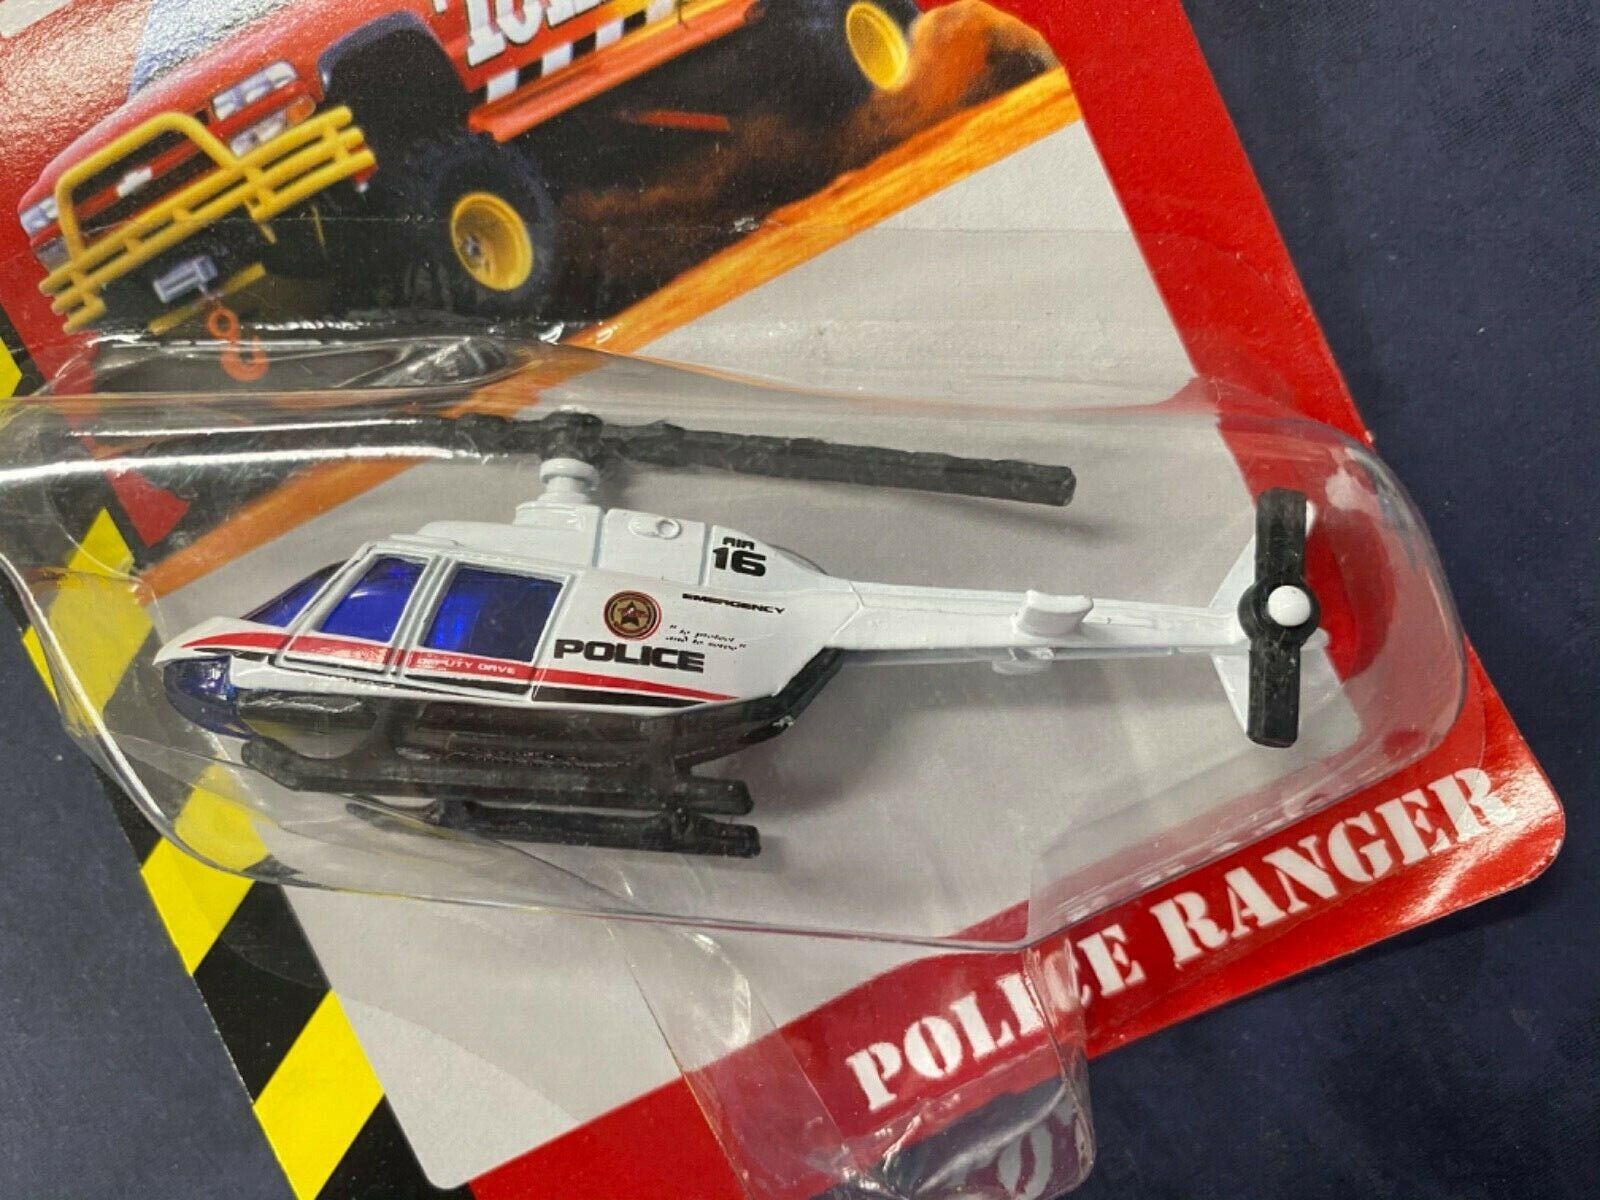 Tonka Die Cast Collection Police Ranger 28/50 Air 16